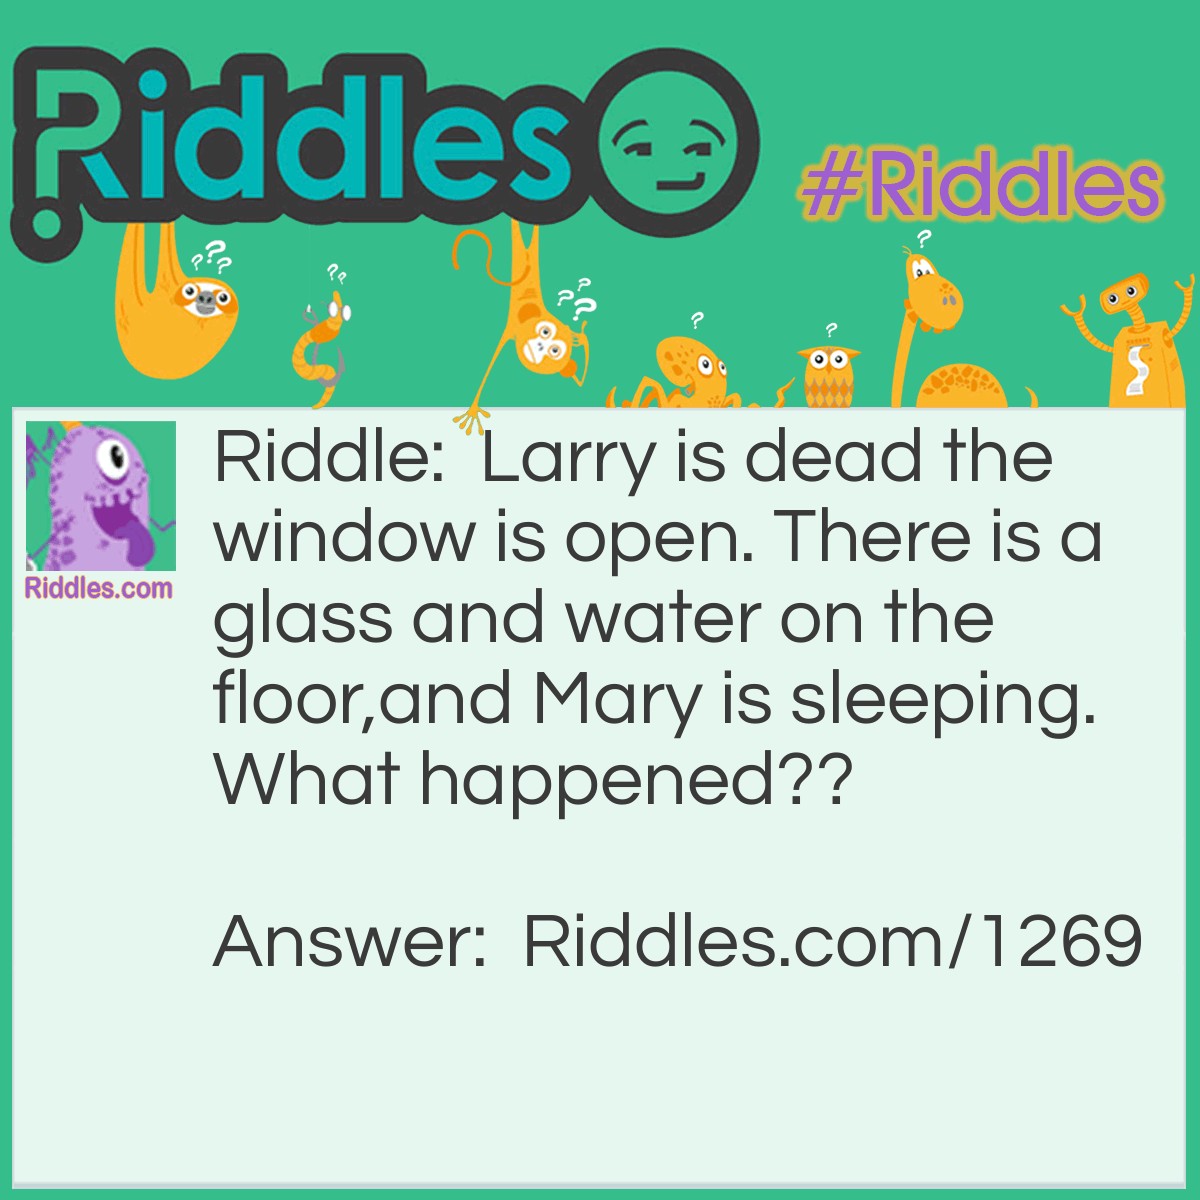 Riddle: Larry is dead the window is open. There is a glass and water on the floor,and Mary is sleeping.
What happened?? Answer: Larry is a fish. the breeze from the window knocked over his fishbowl it broke and he died from no water.